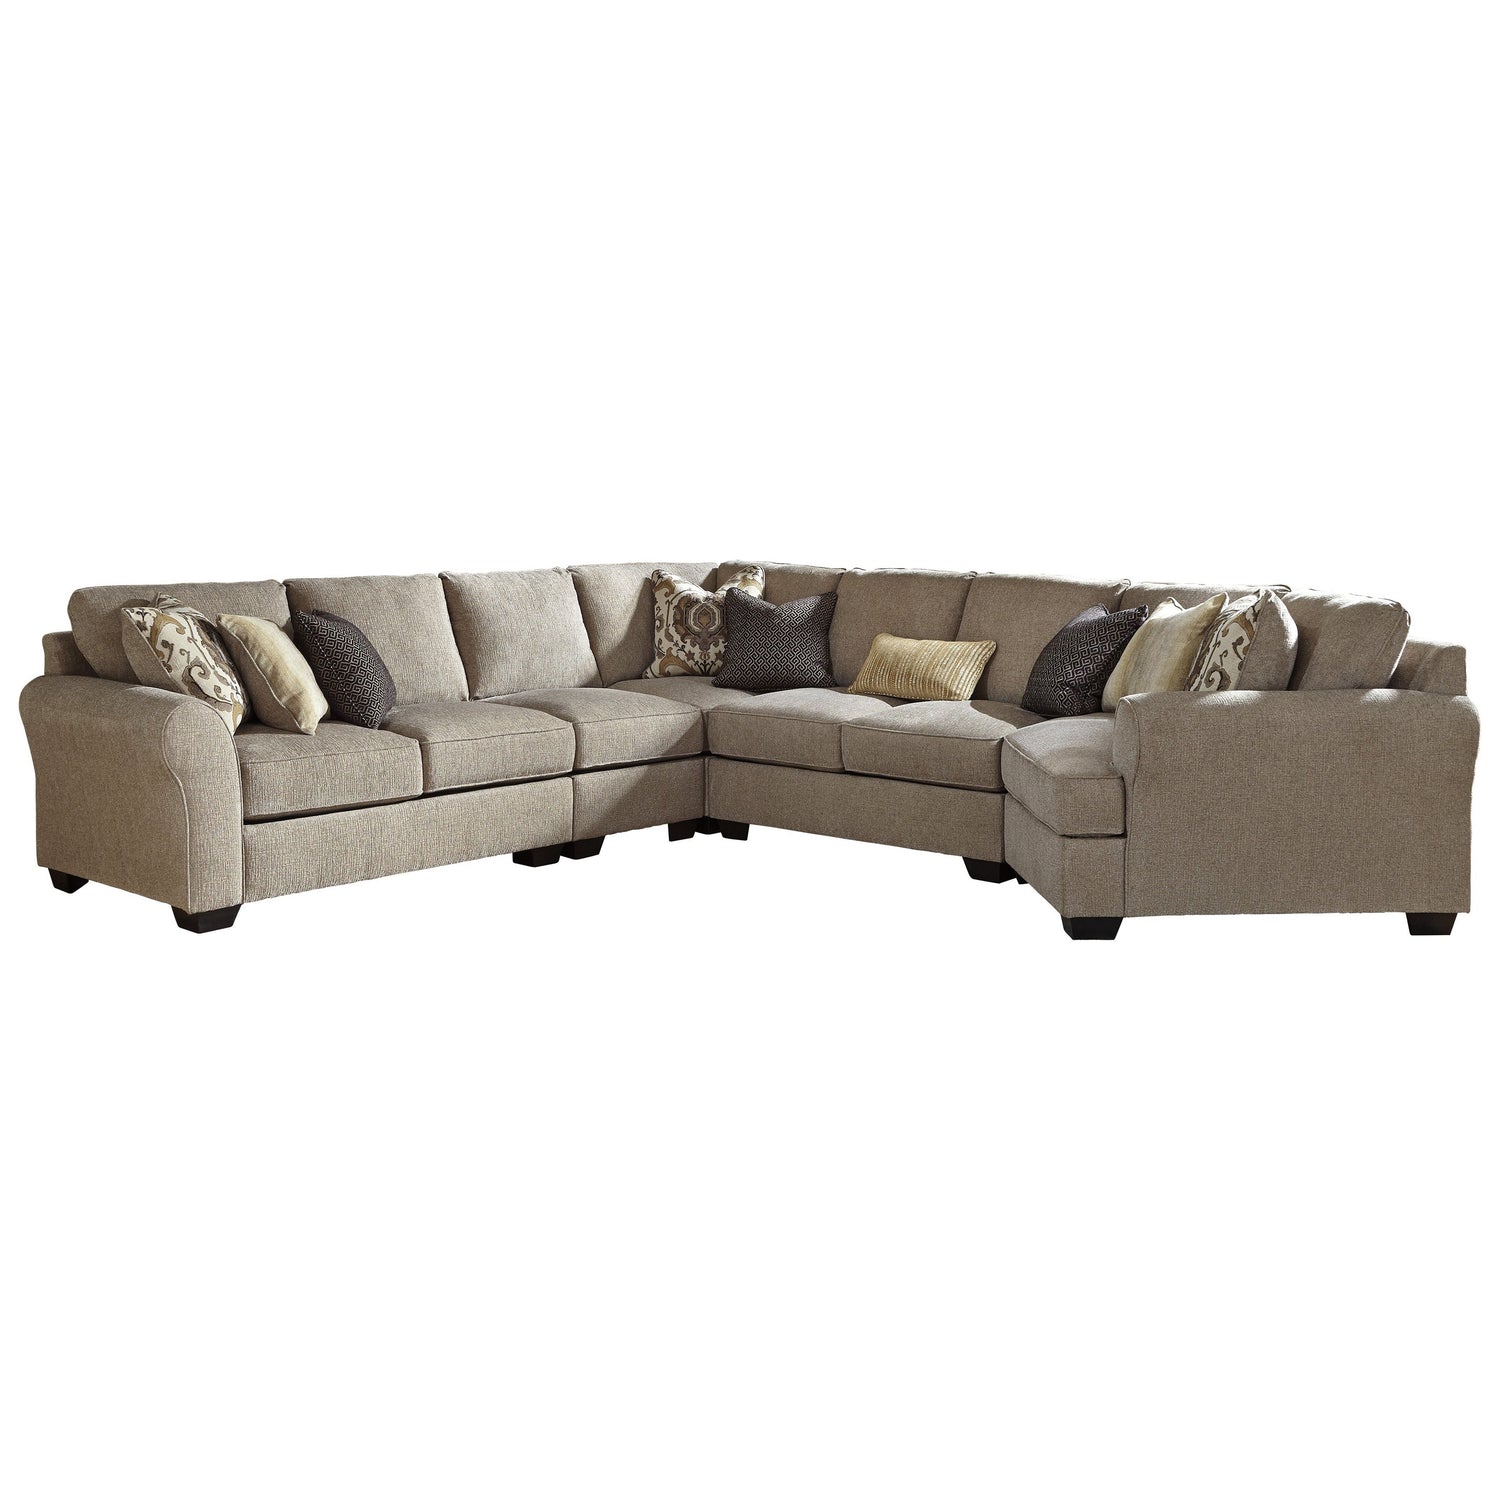 Pantomine 5-Piece Sectional with Cuddler Ash-39122S5